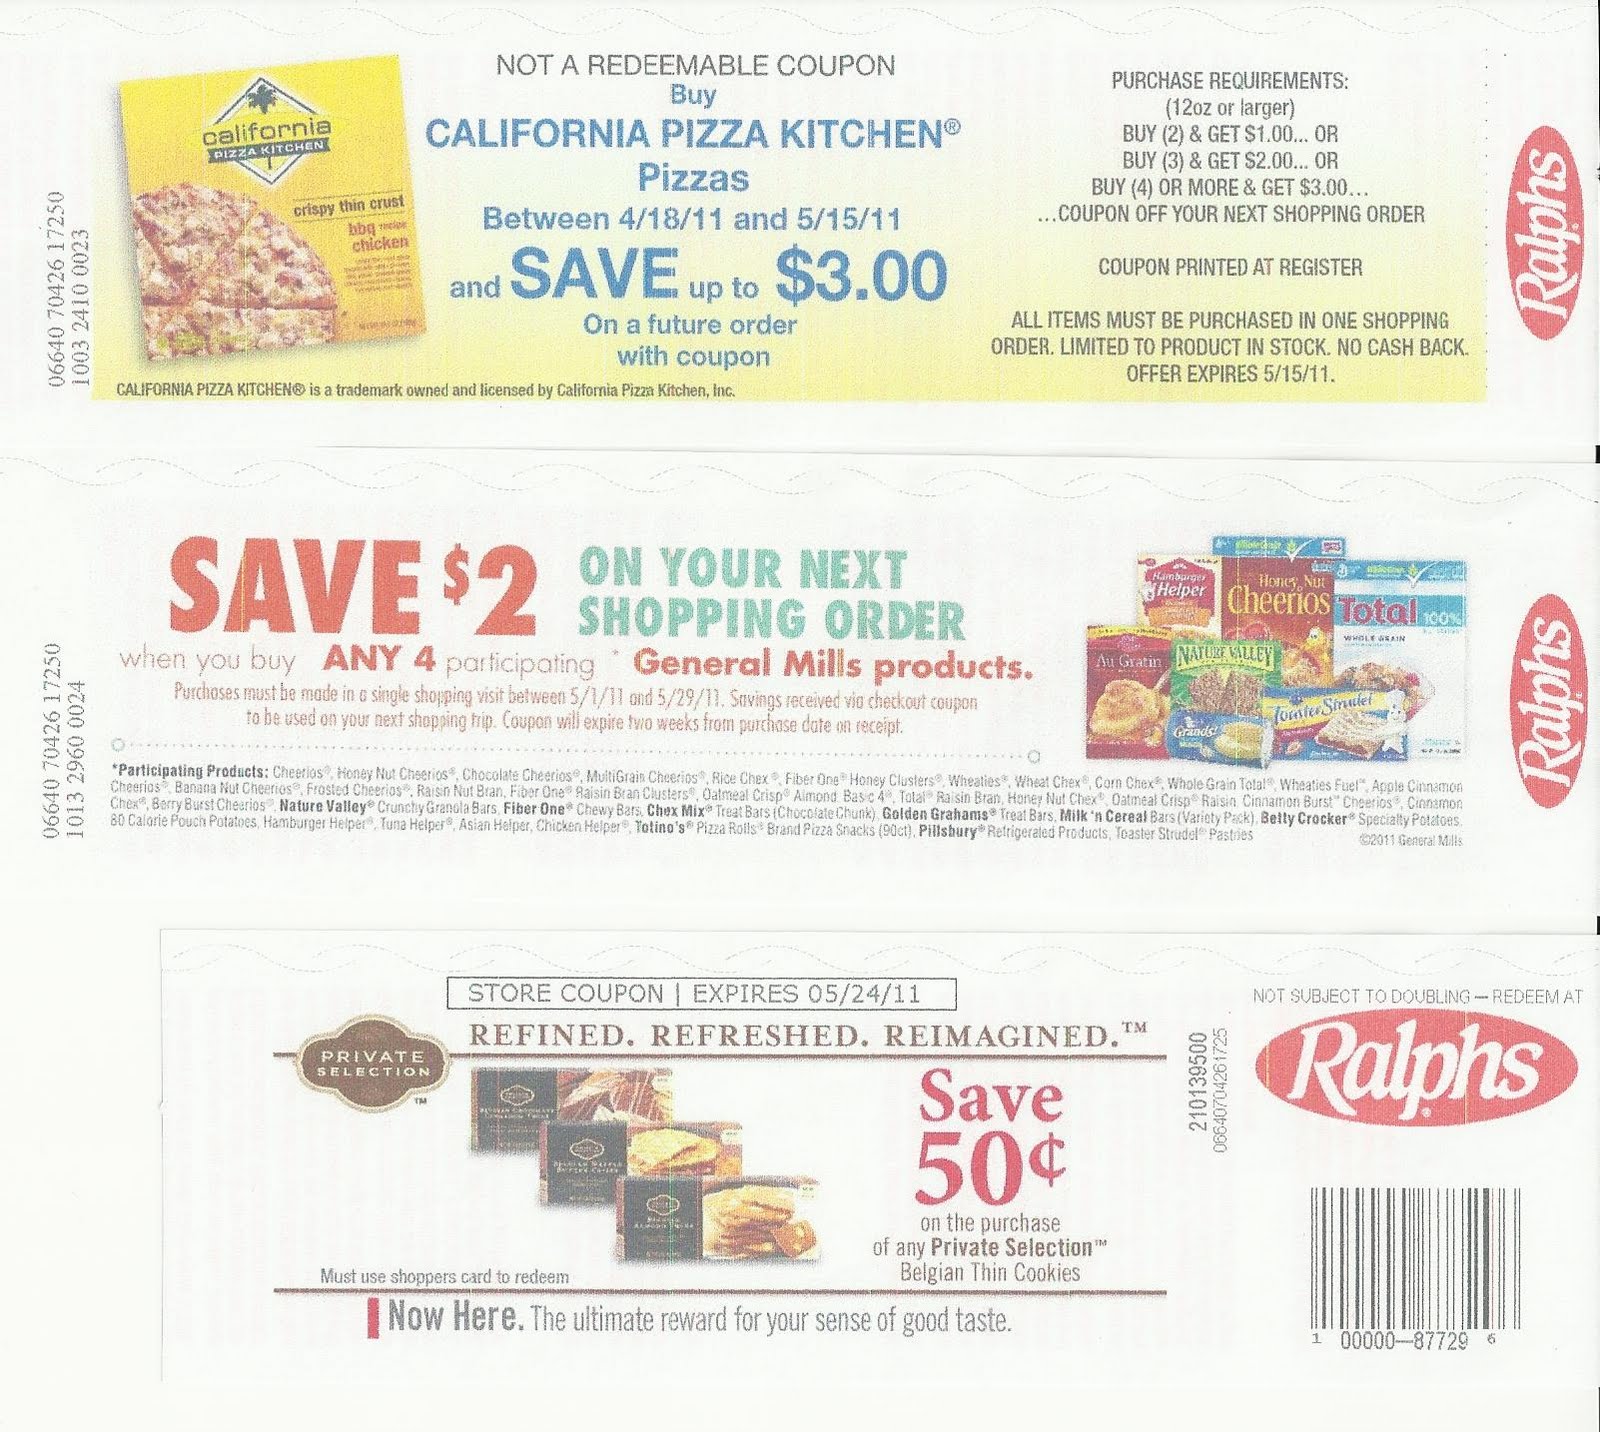 Savings Chatter: Difference In Coupons